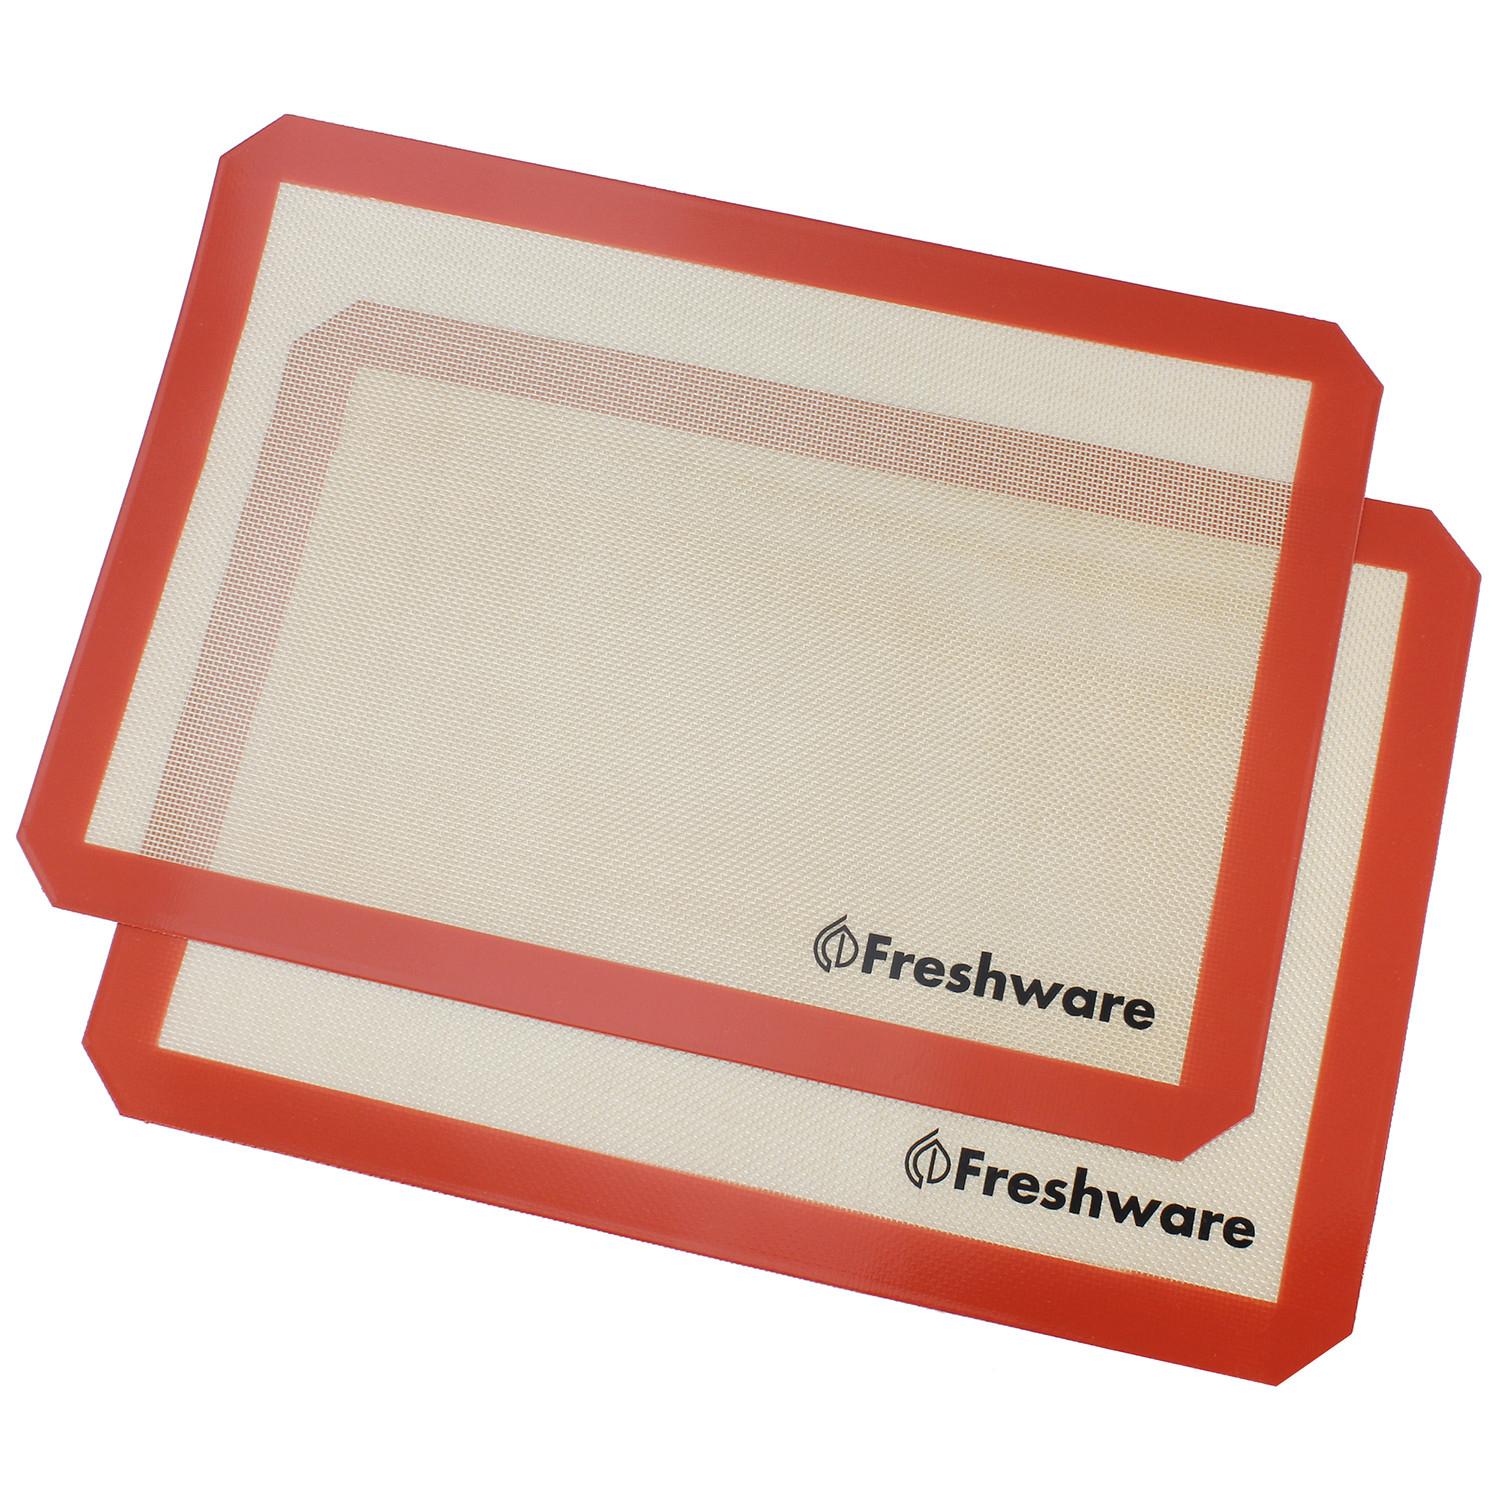 Freshware Silicone Baking Mat, Half Size, 16.5 x 11.6 inch, 2-Pack